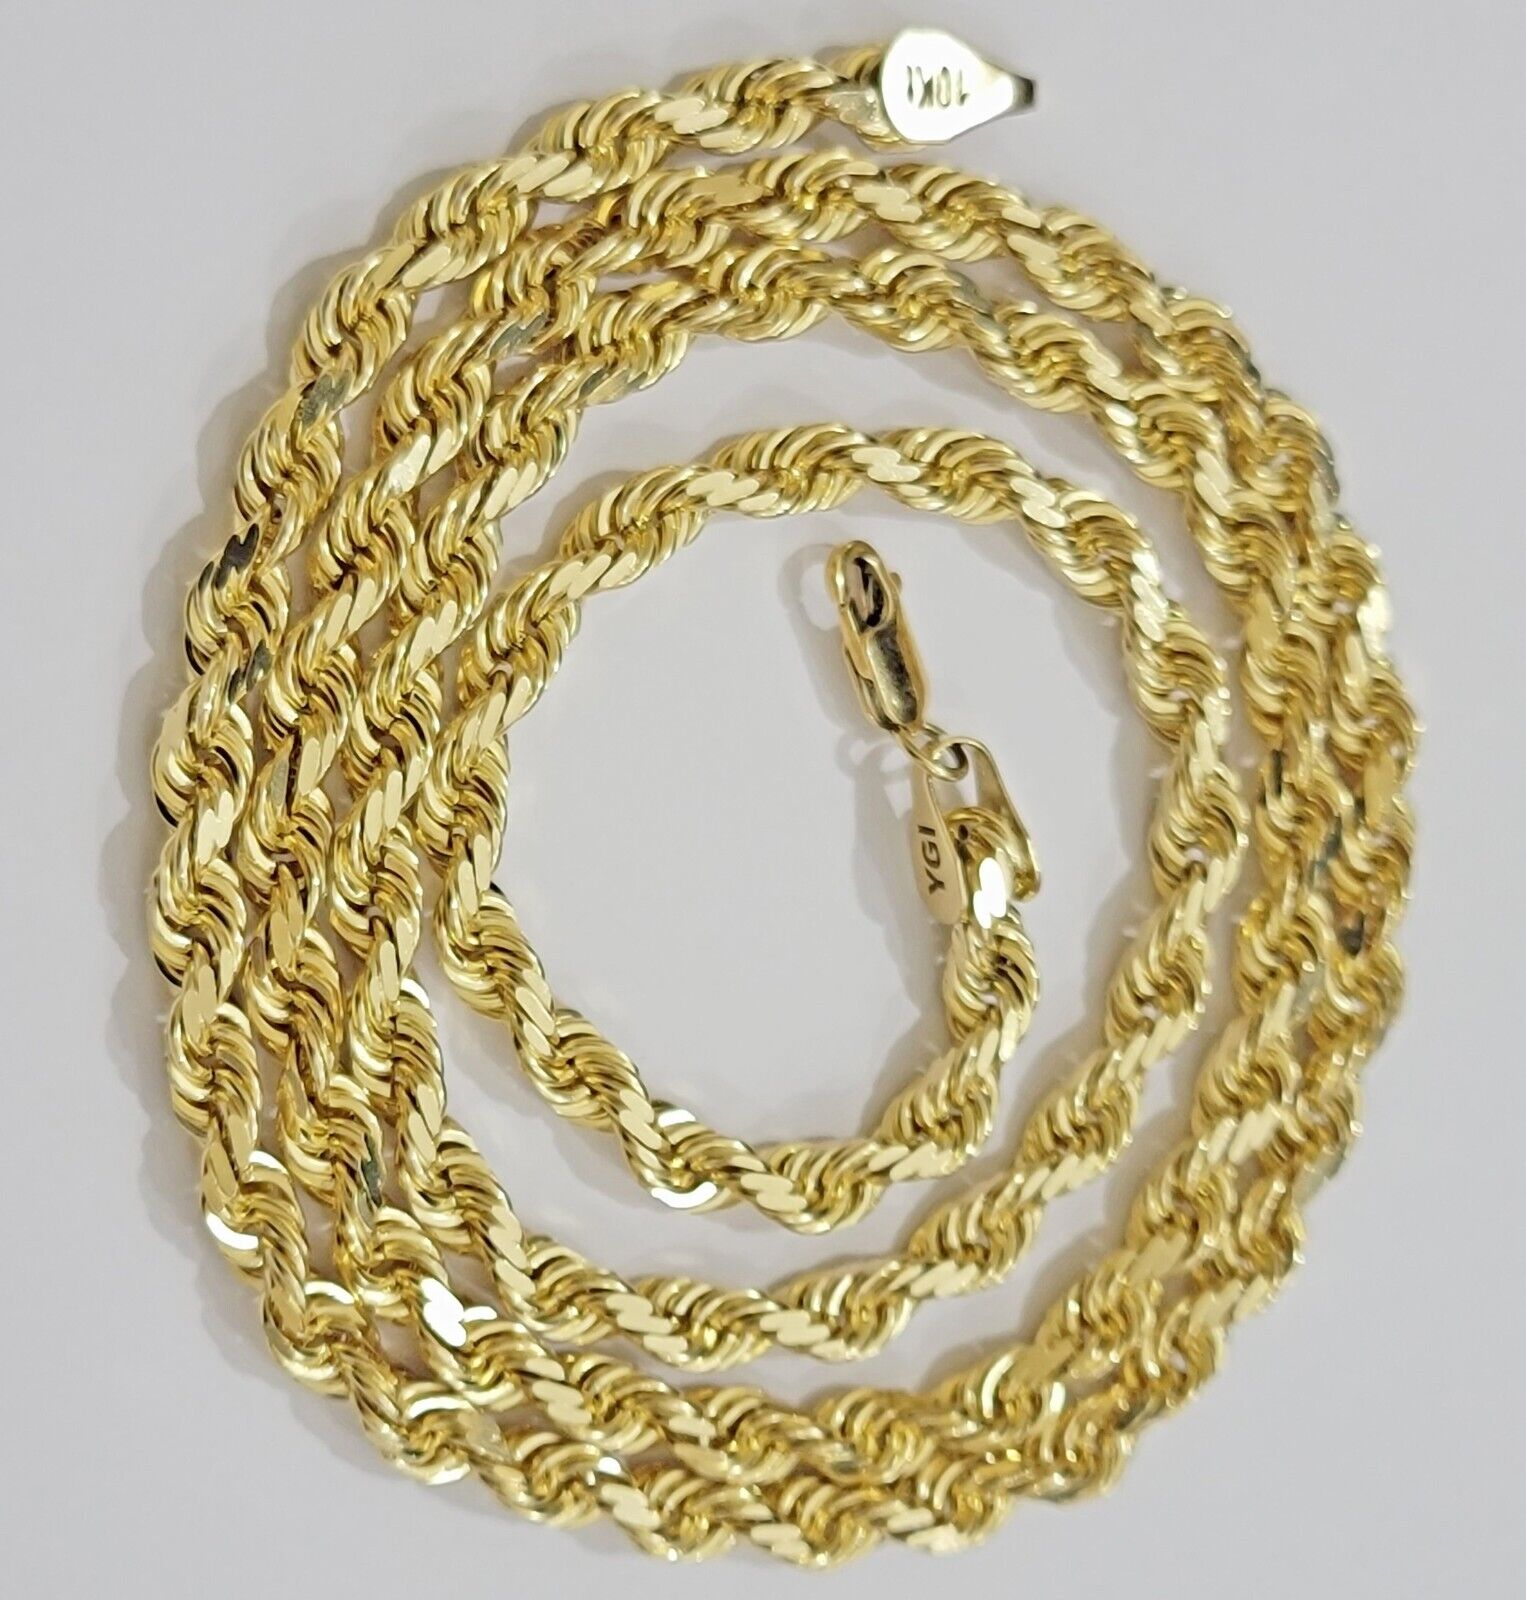 6mm Rope Chain Necklace 10k Yellow Gold Solid 24